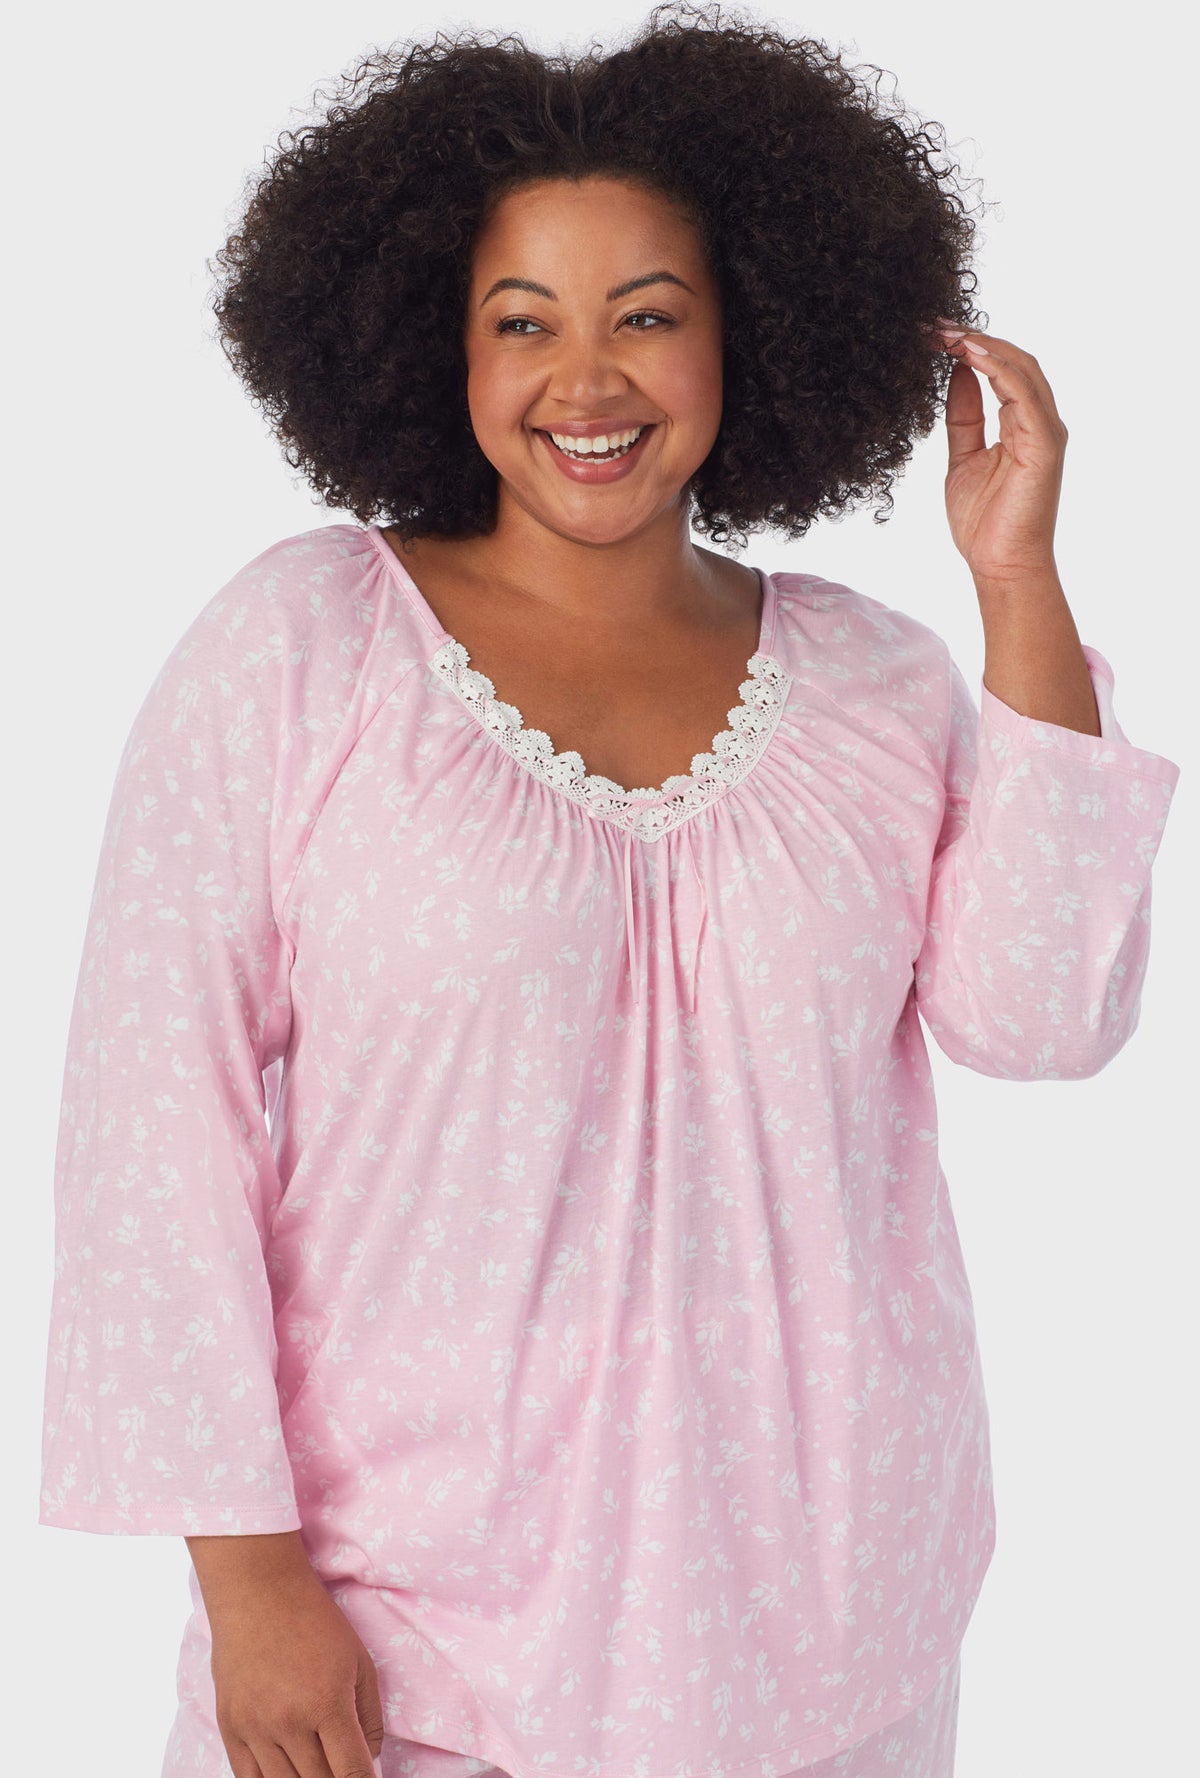 A lady wearing pink 3/4 Sleeve Long Pant plus size PJ Set with White Rosebuds  print